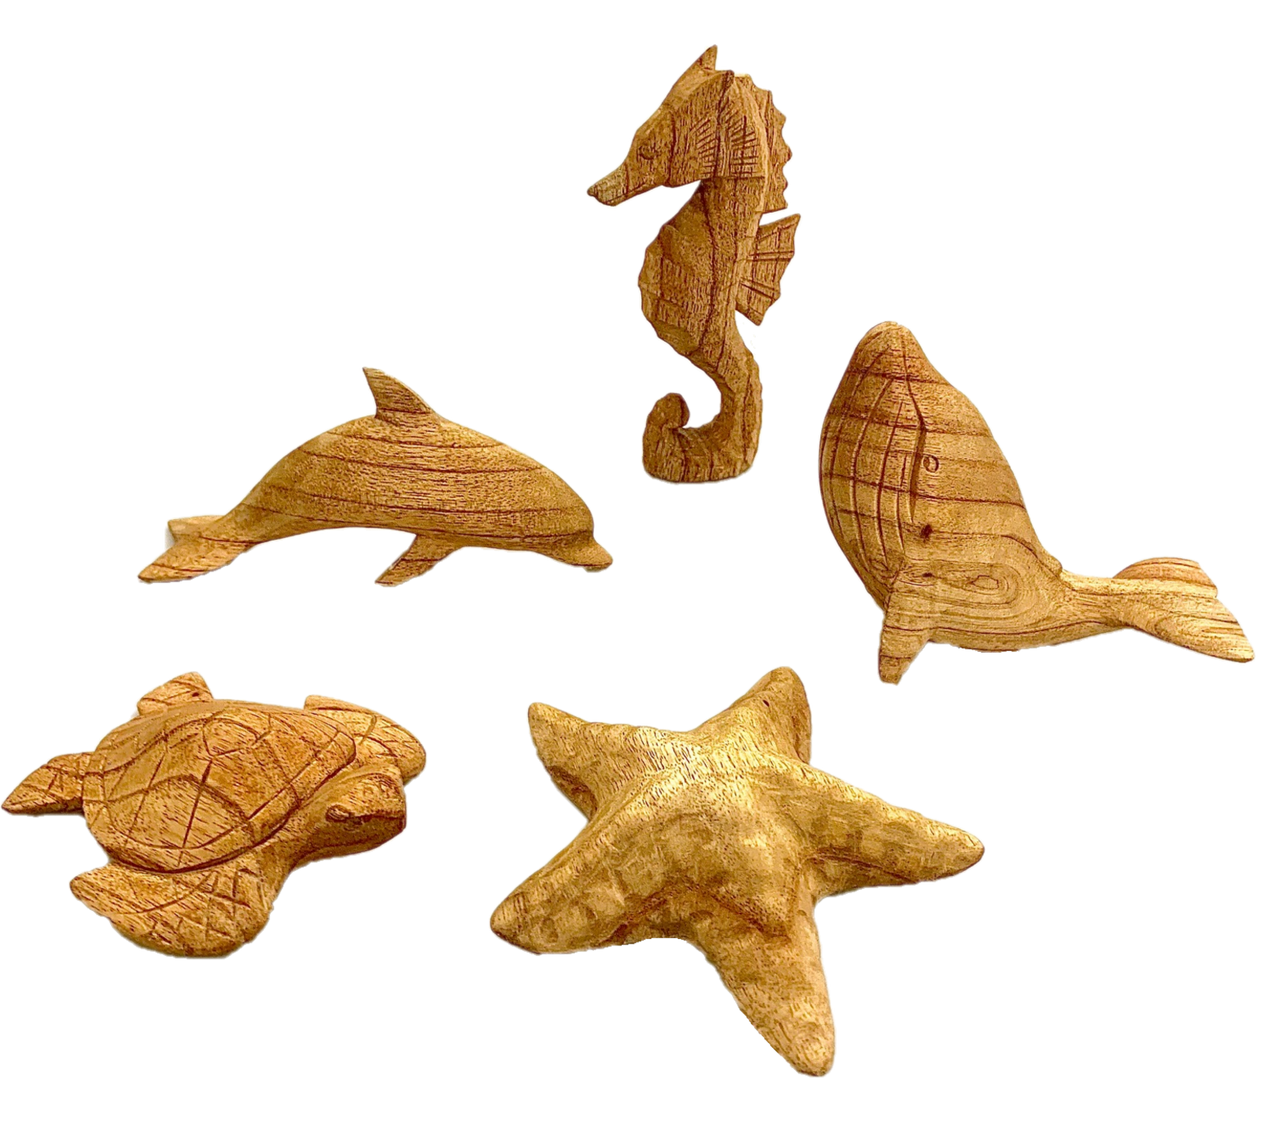 Papoose Sea Animals Hand Carved/5pc